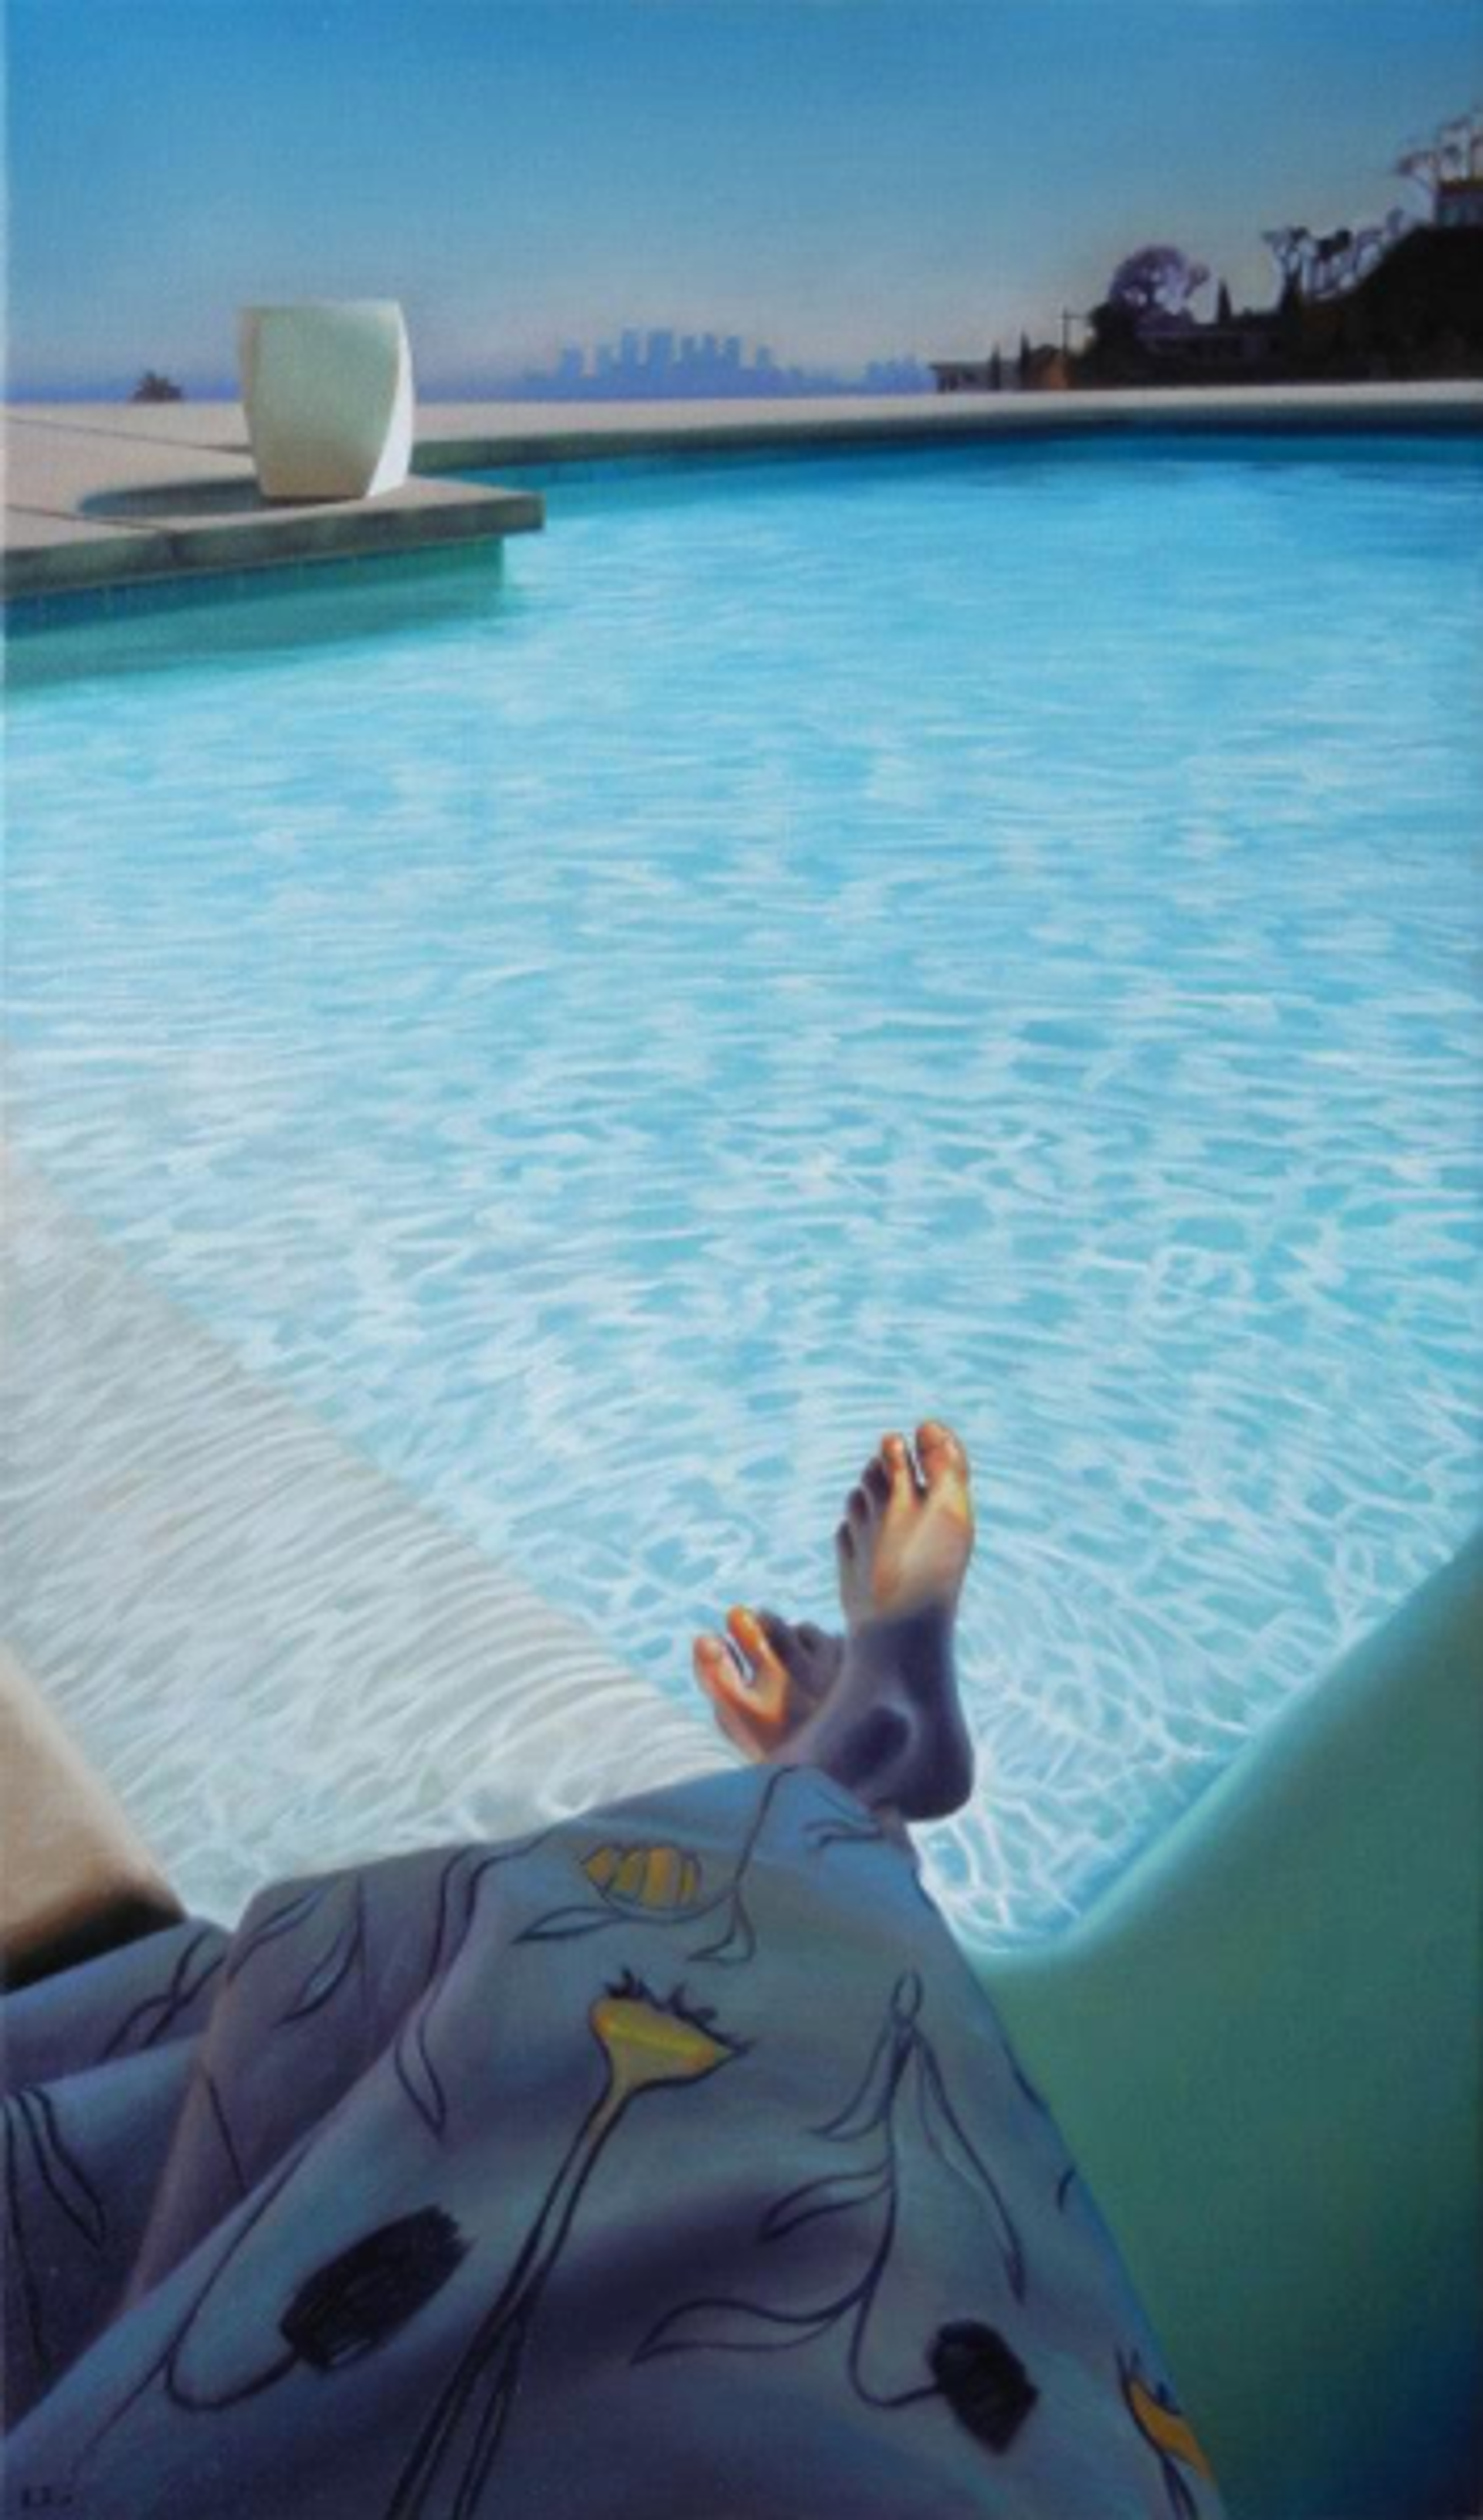 Stahl House Pool (S/N) by Carrie Graber